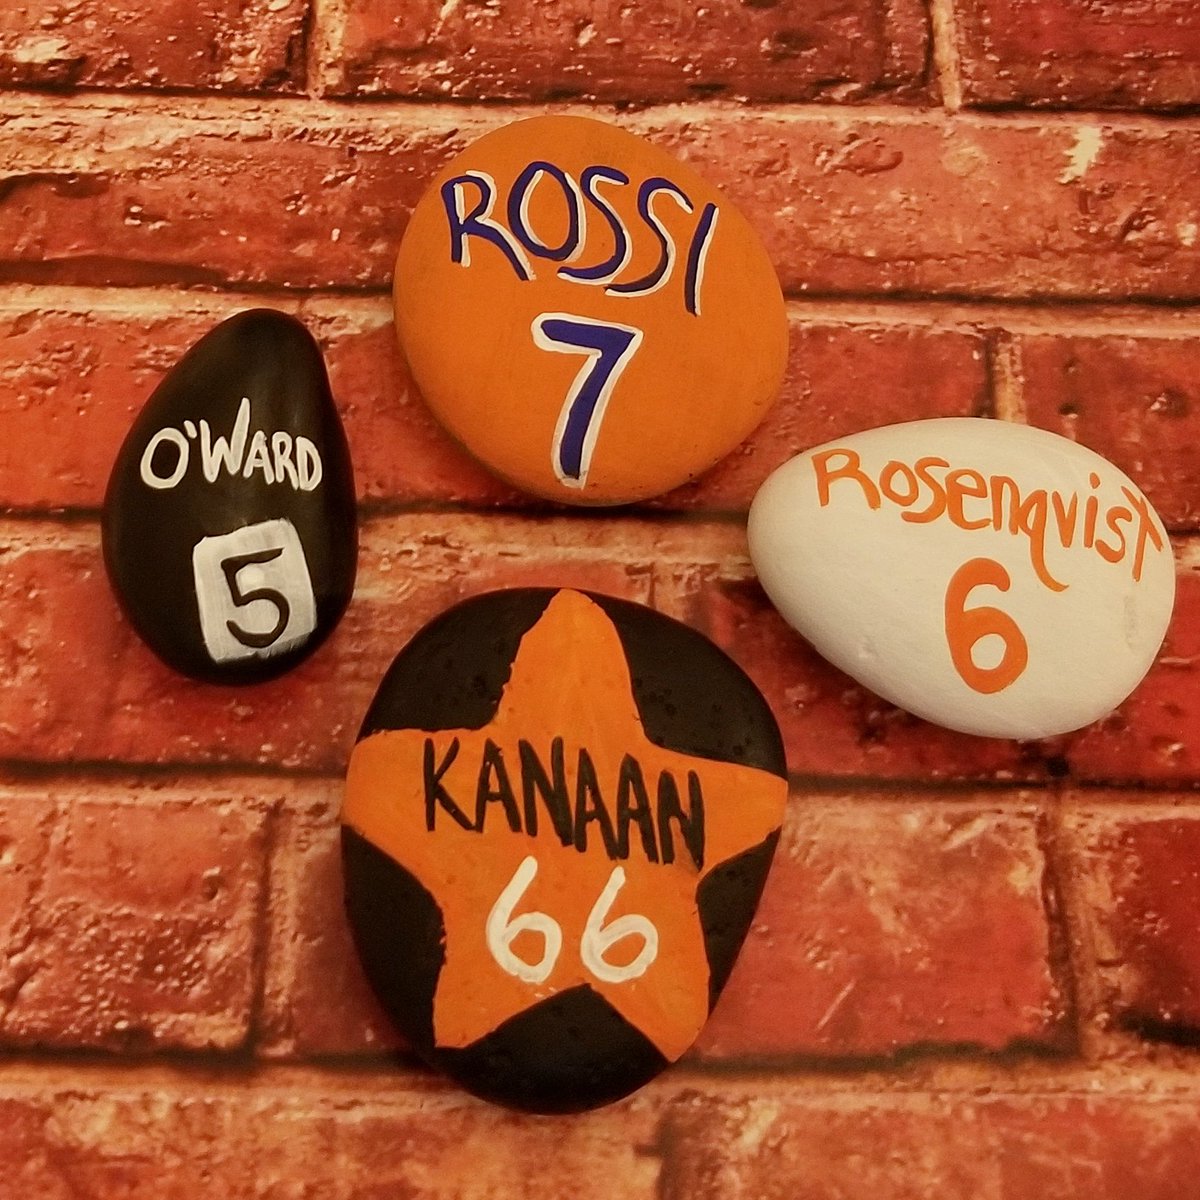 #ThisIsMay 🏎 To celebrate the 107th Running of the #Indy500...We are trying to see how FAST these 'hidden' rocks can be found in/around #Indy with NO DNFs! 🏁

#FindMe #IndyCar #IMS #ArrowMcLarenSP #Rossi #Kanaan #TK #Rosenqvist #OWard